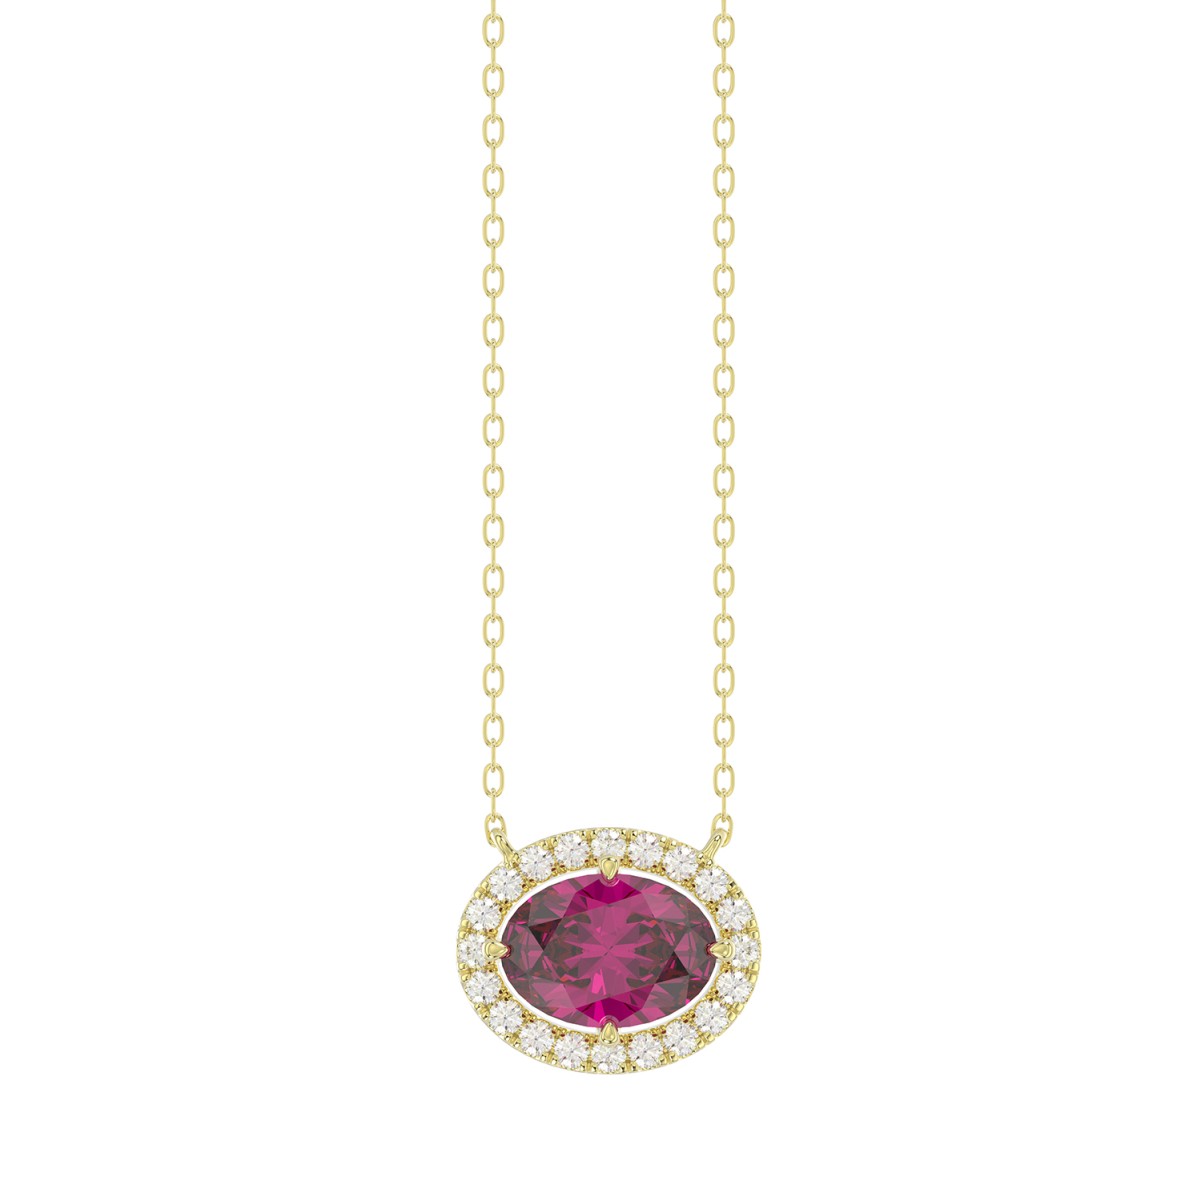 18K YELLOW GOLD 1/6CT ROUND/OVAL DIAMOND LADIES NECKLACE (COLOR STONE OVAL RUBY DIAMOND 1.05CT)